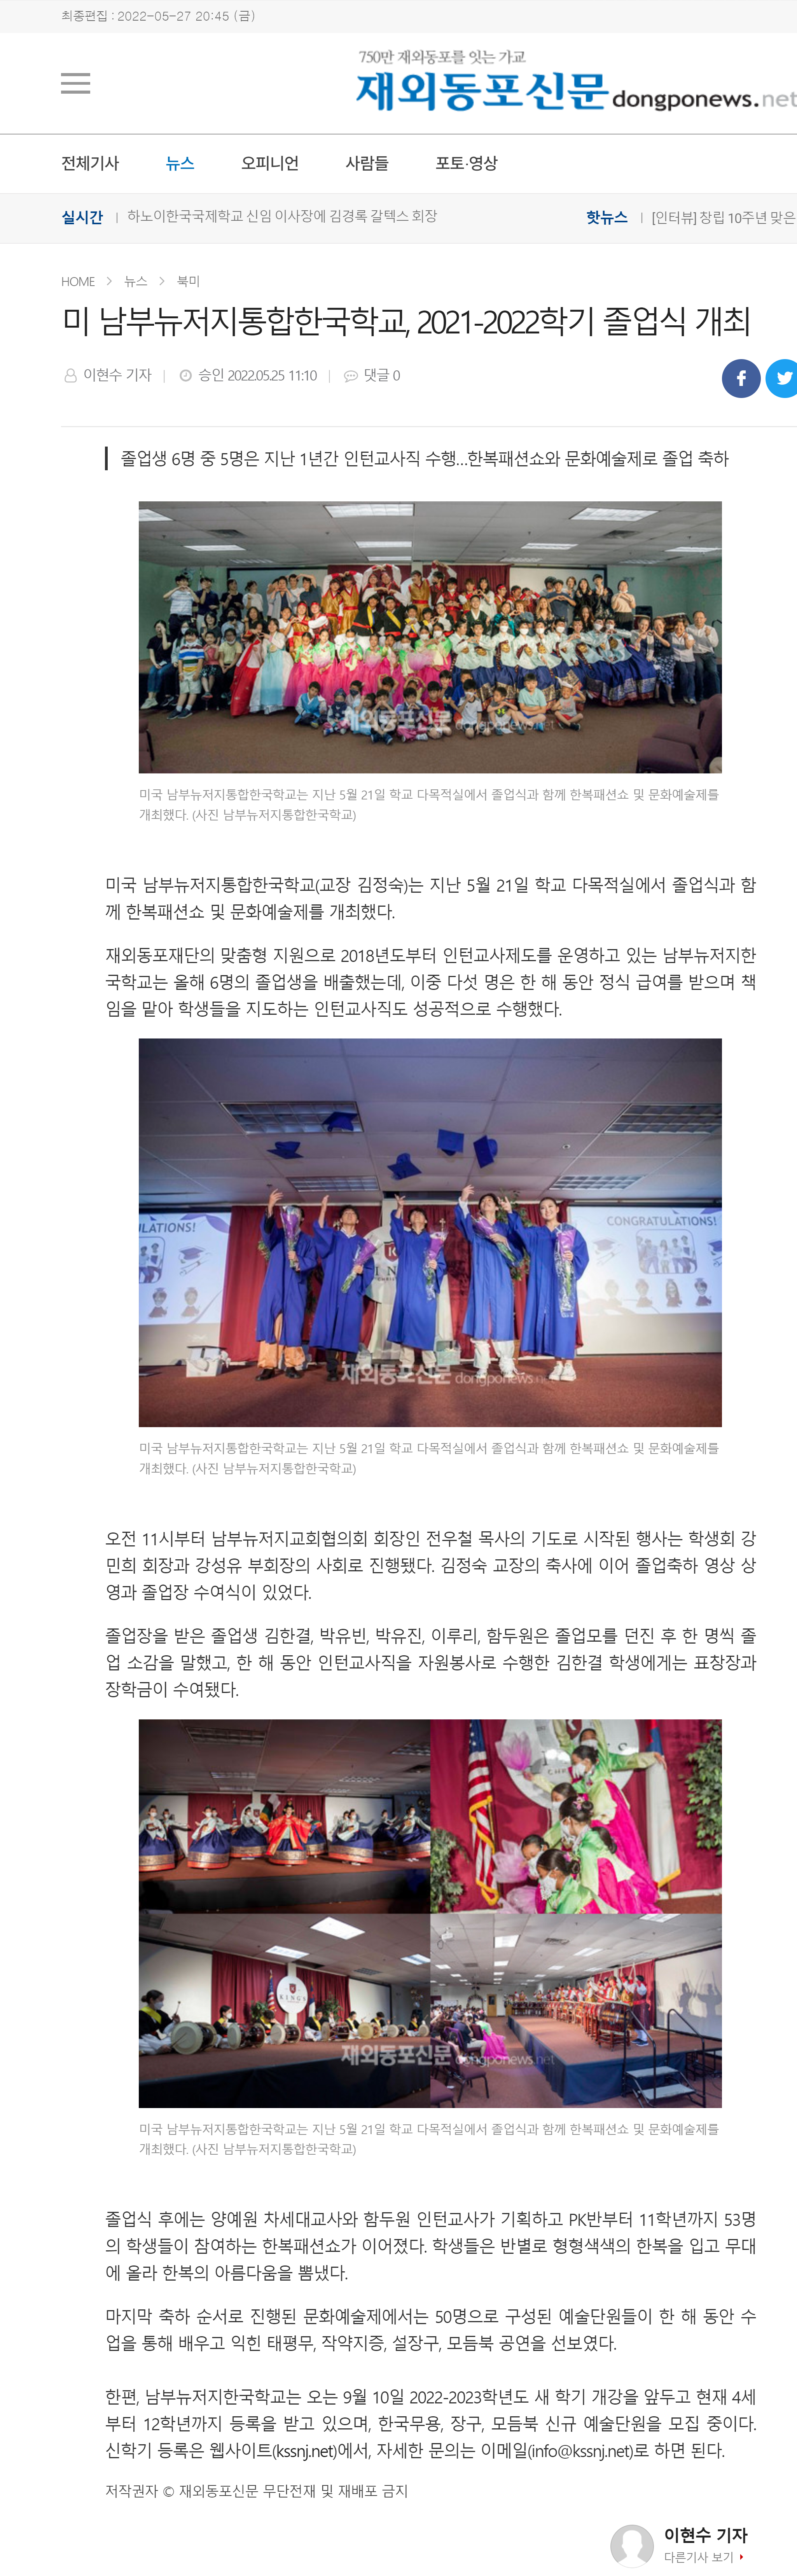 screencapture-dongponews-net-news-articleView-html-2022-05-27-14_20_27.png